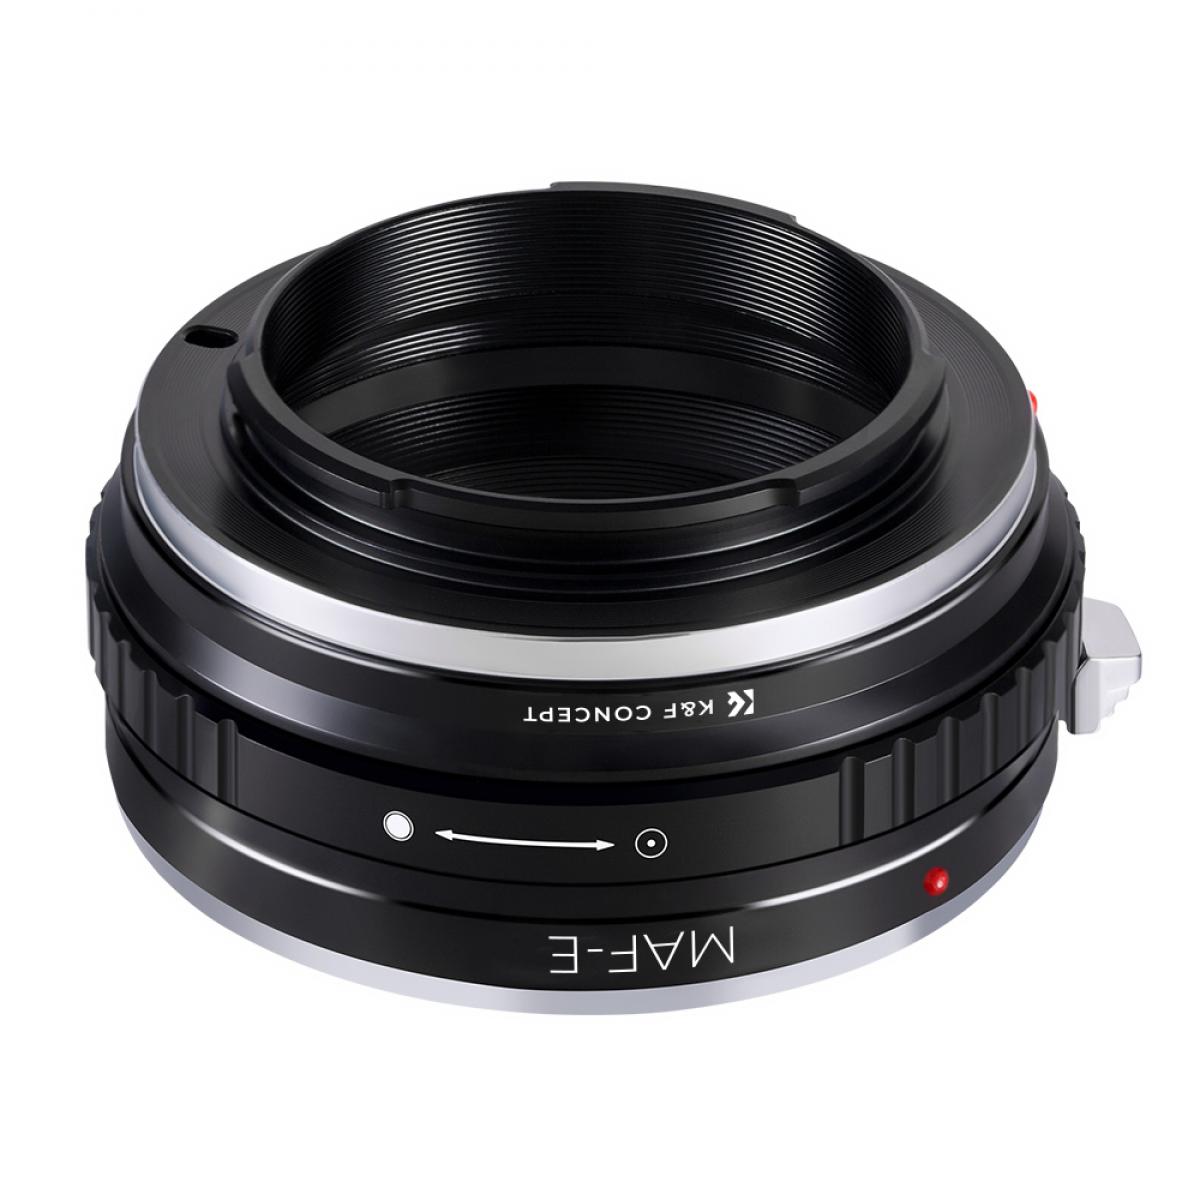 Sony A Mount Lenses to Sony E Mount Camera Adapter